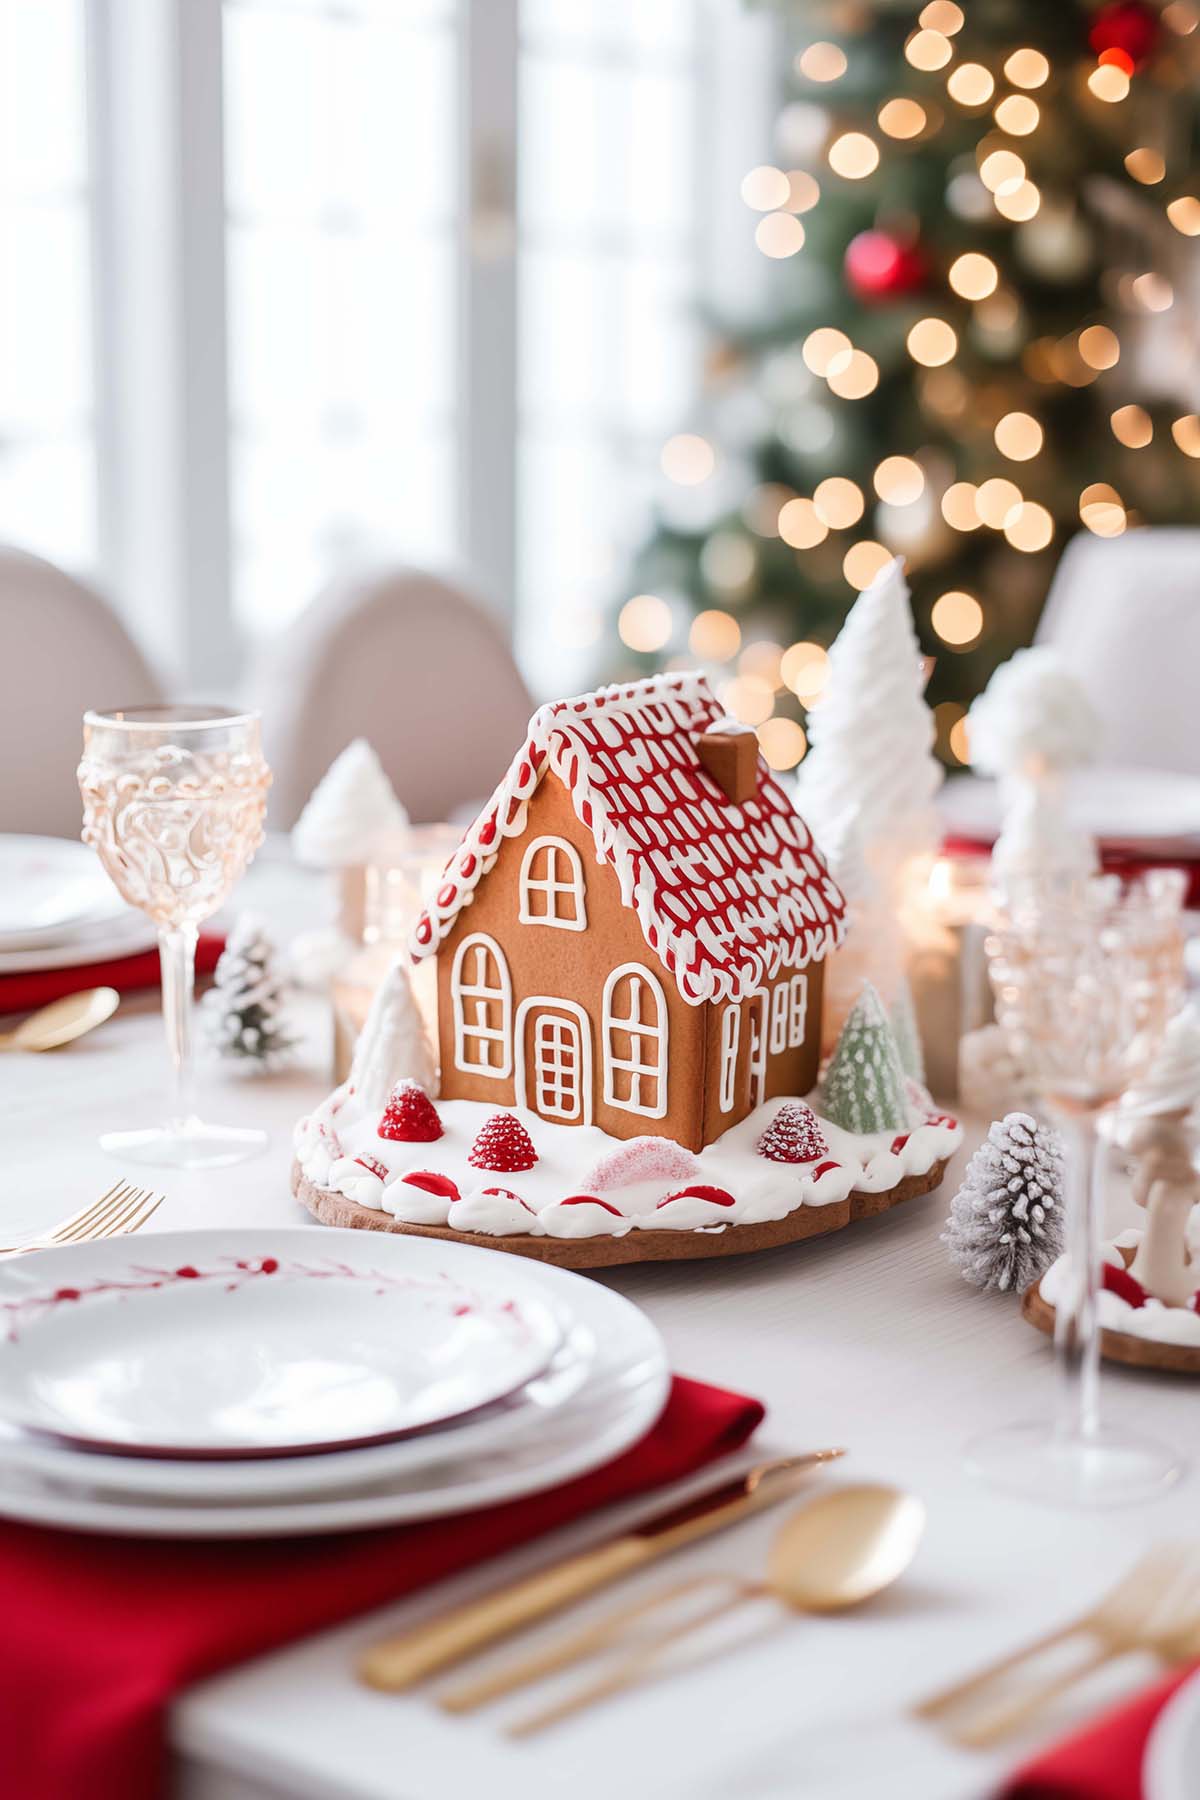 Gingerbread house decorated with white and red frosting on a tablescape with white plates and red napkins.